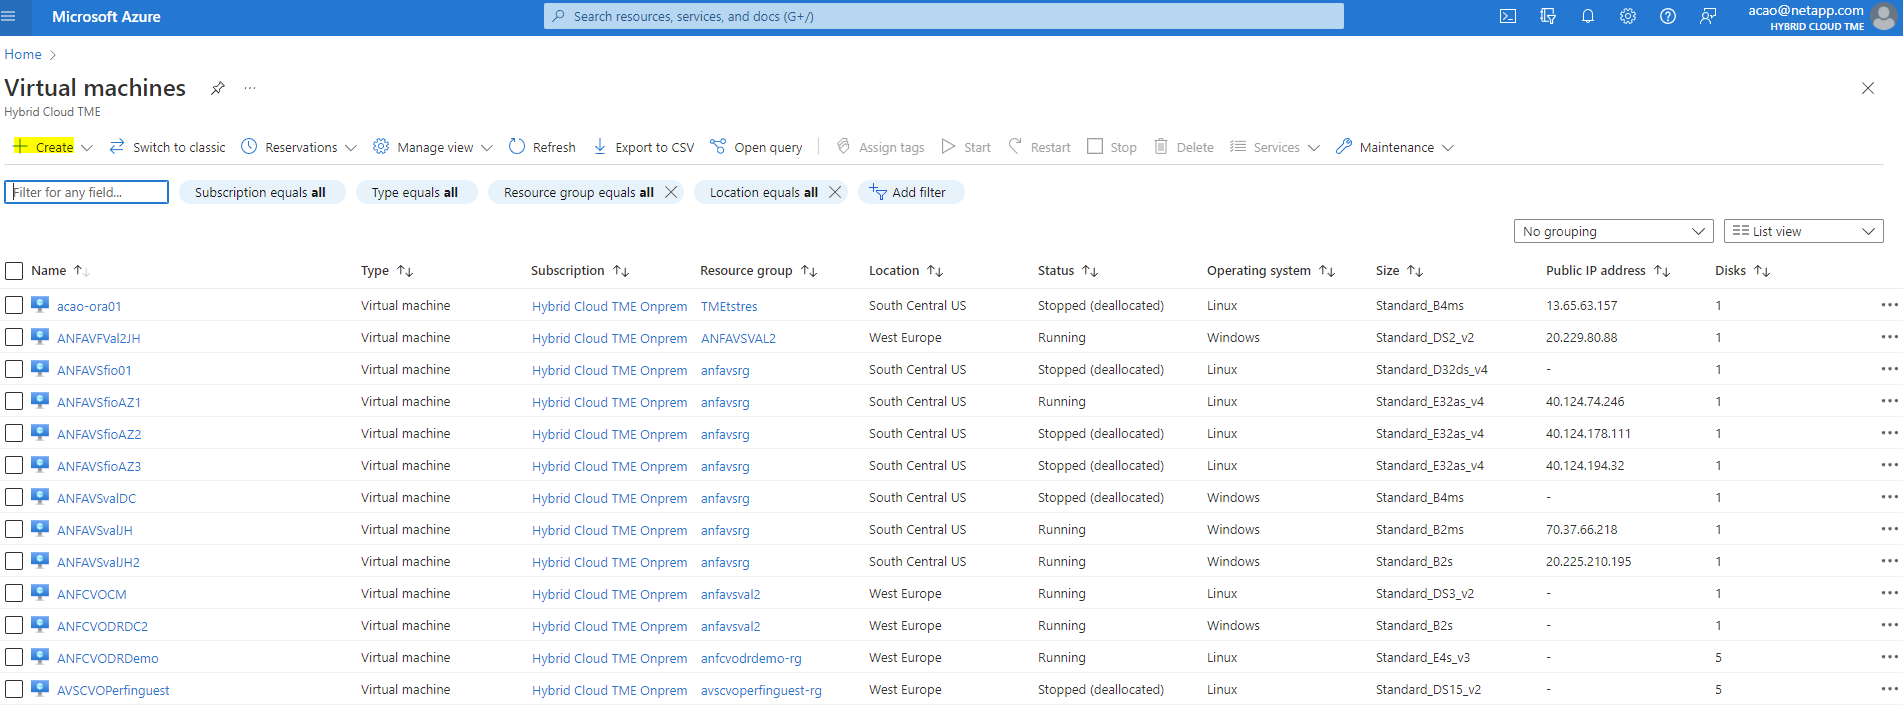 This screenshot shows the list of available Azure VMs.